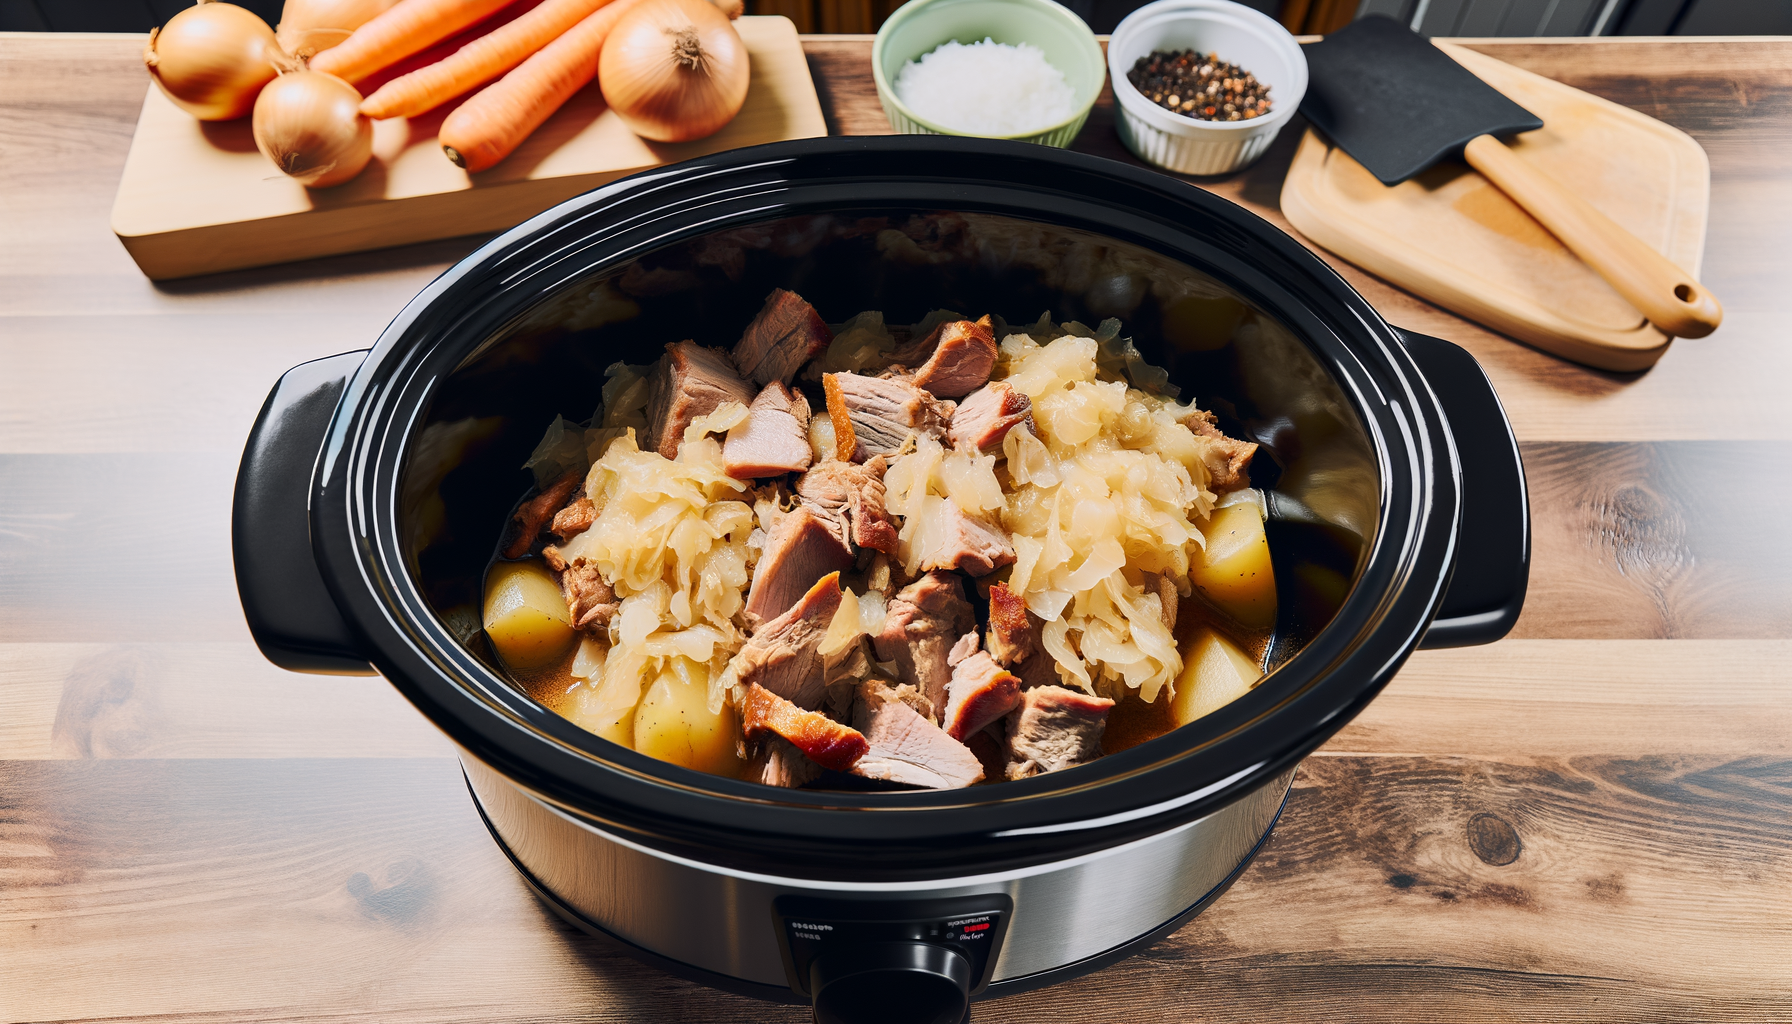 A slow cooker on a wooden counter with tender lancaster county pork and tangy sauerkraut, surrounded by home cooking essentials.